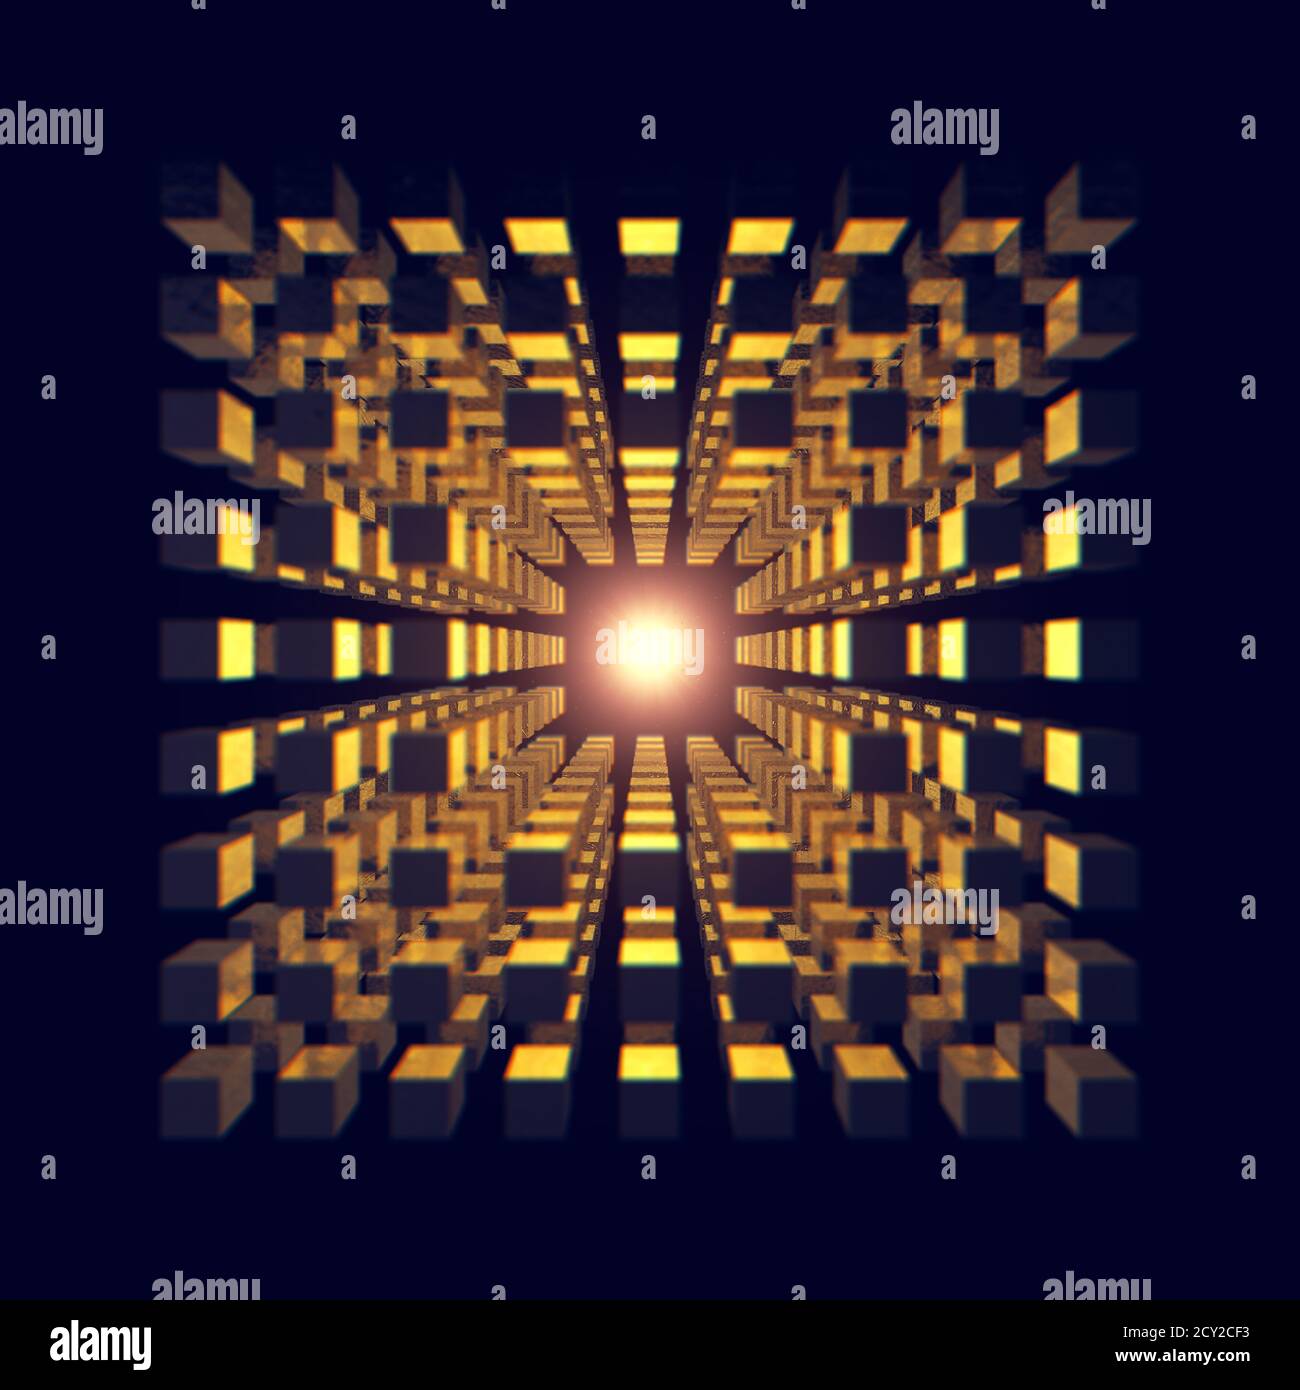 Abstract physics concept illustrating the Big bang theory of the origin and evolution of universe, 3d illustration concept of Spacetime and the theory Stock Photo